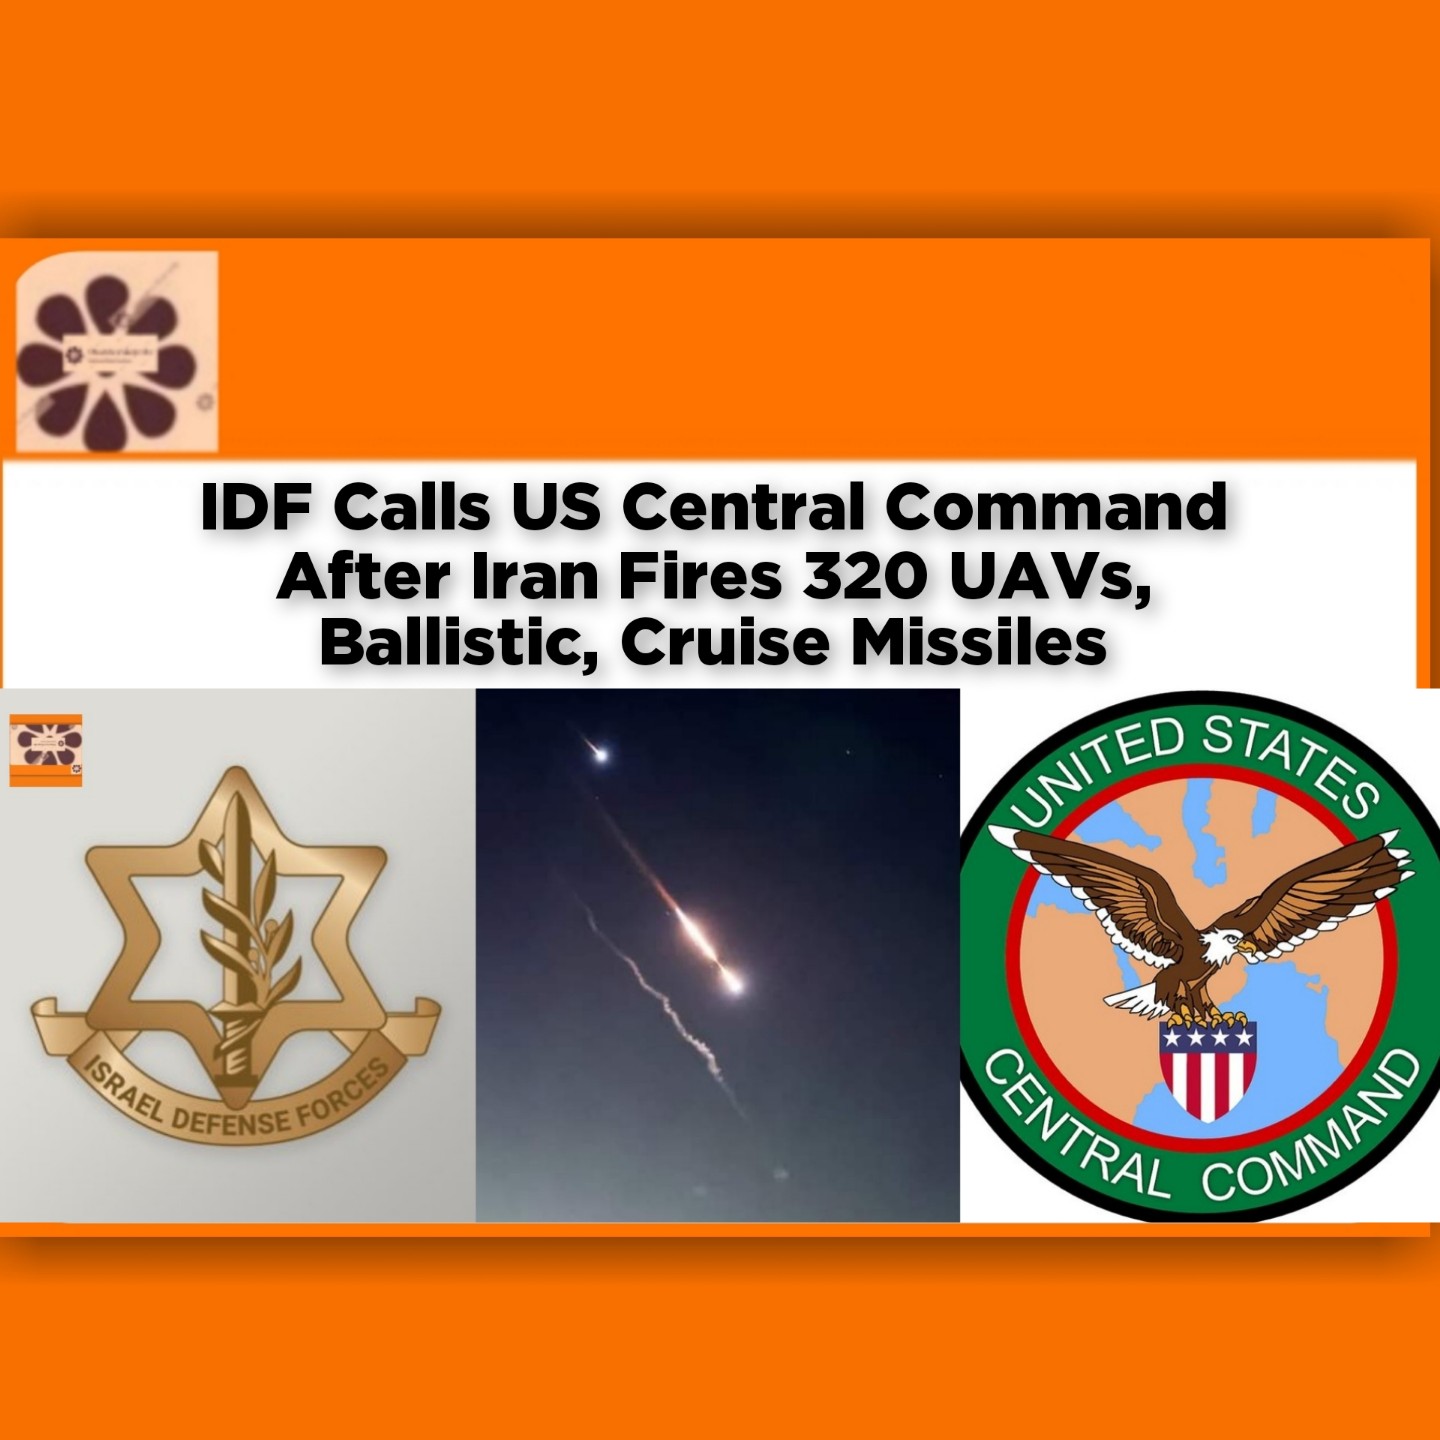 IDF Calls US Central Command After Iran Fires 320 UAVs, Ballistic, Cruise Missiles ~ OsazuwaAkonedo #projects